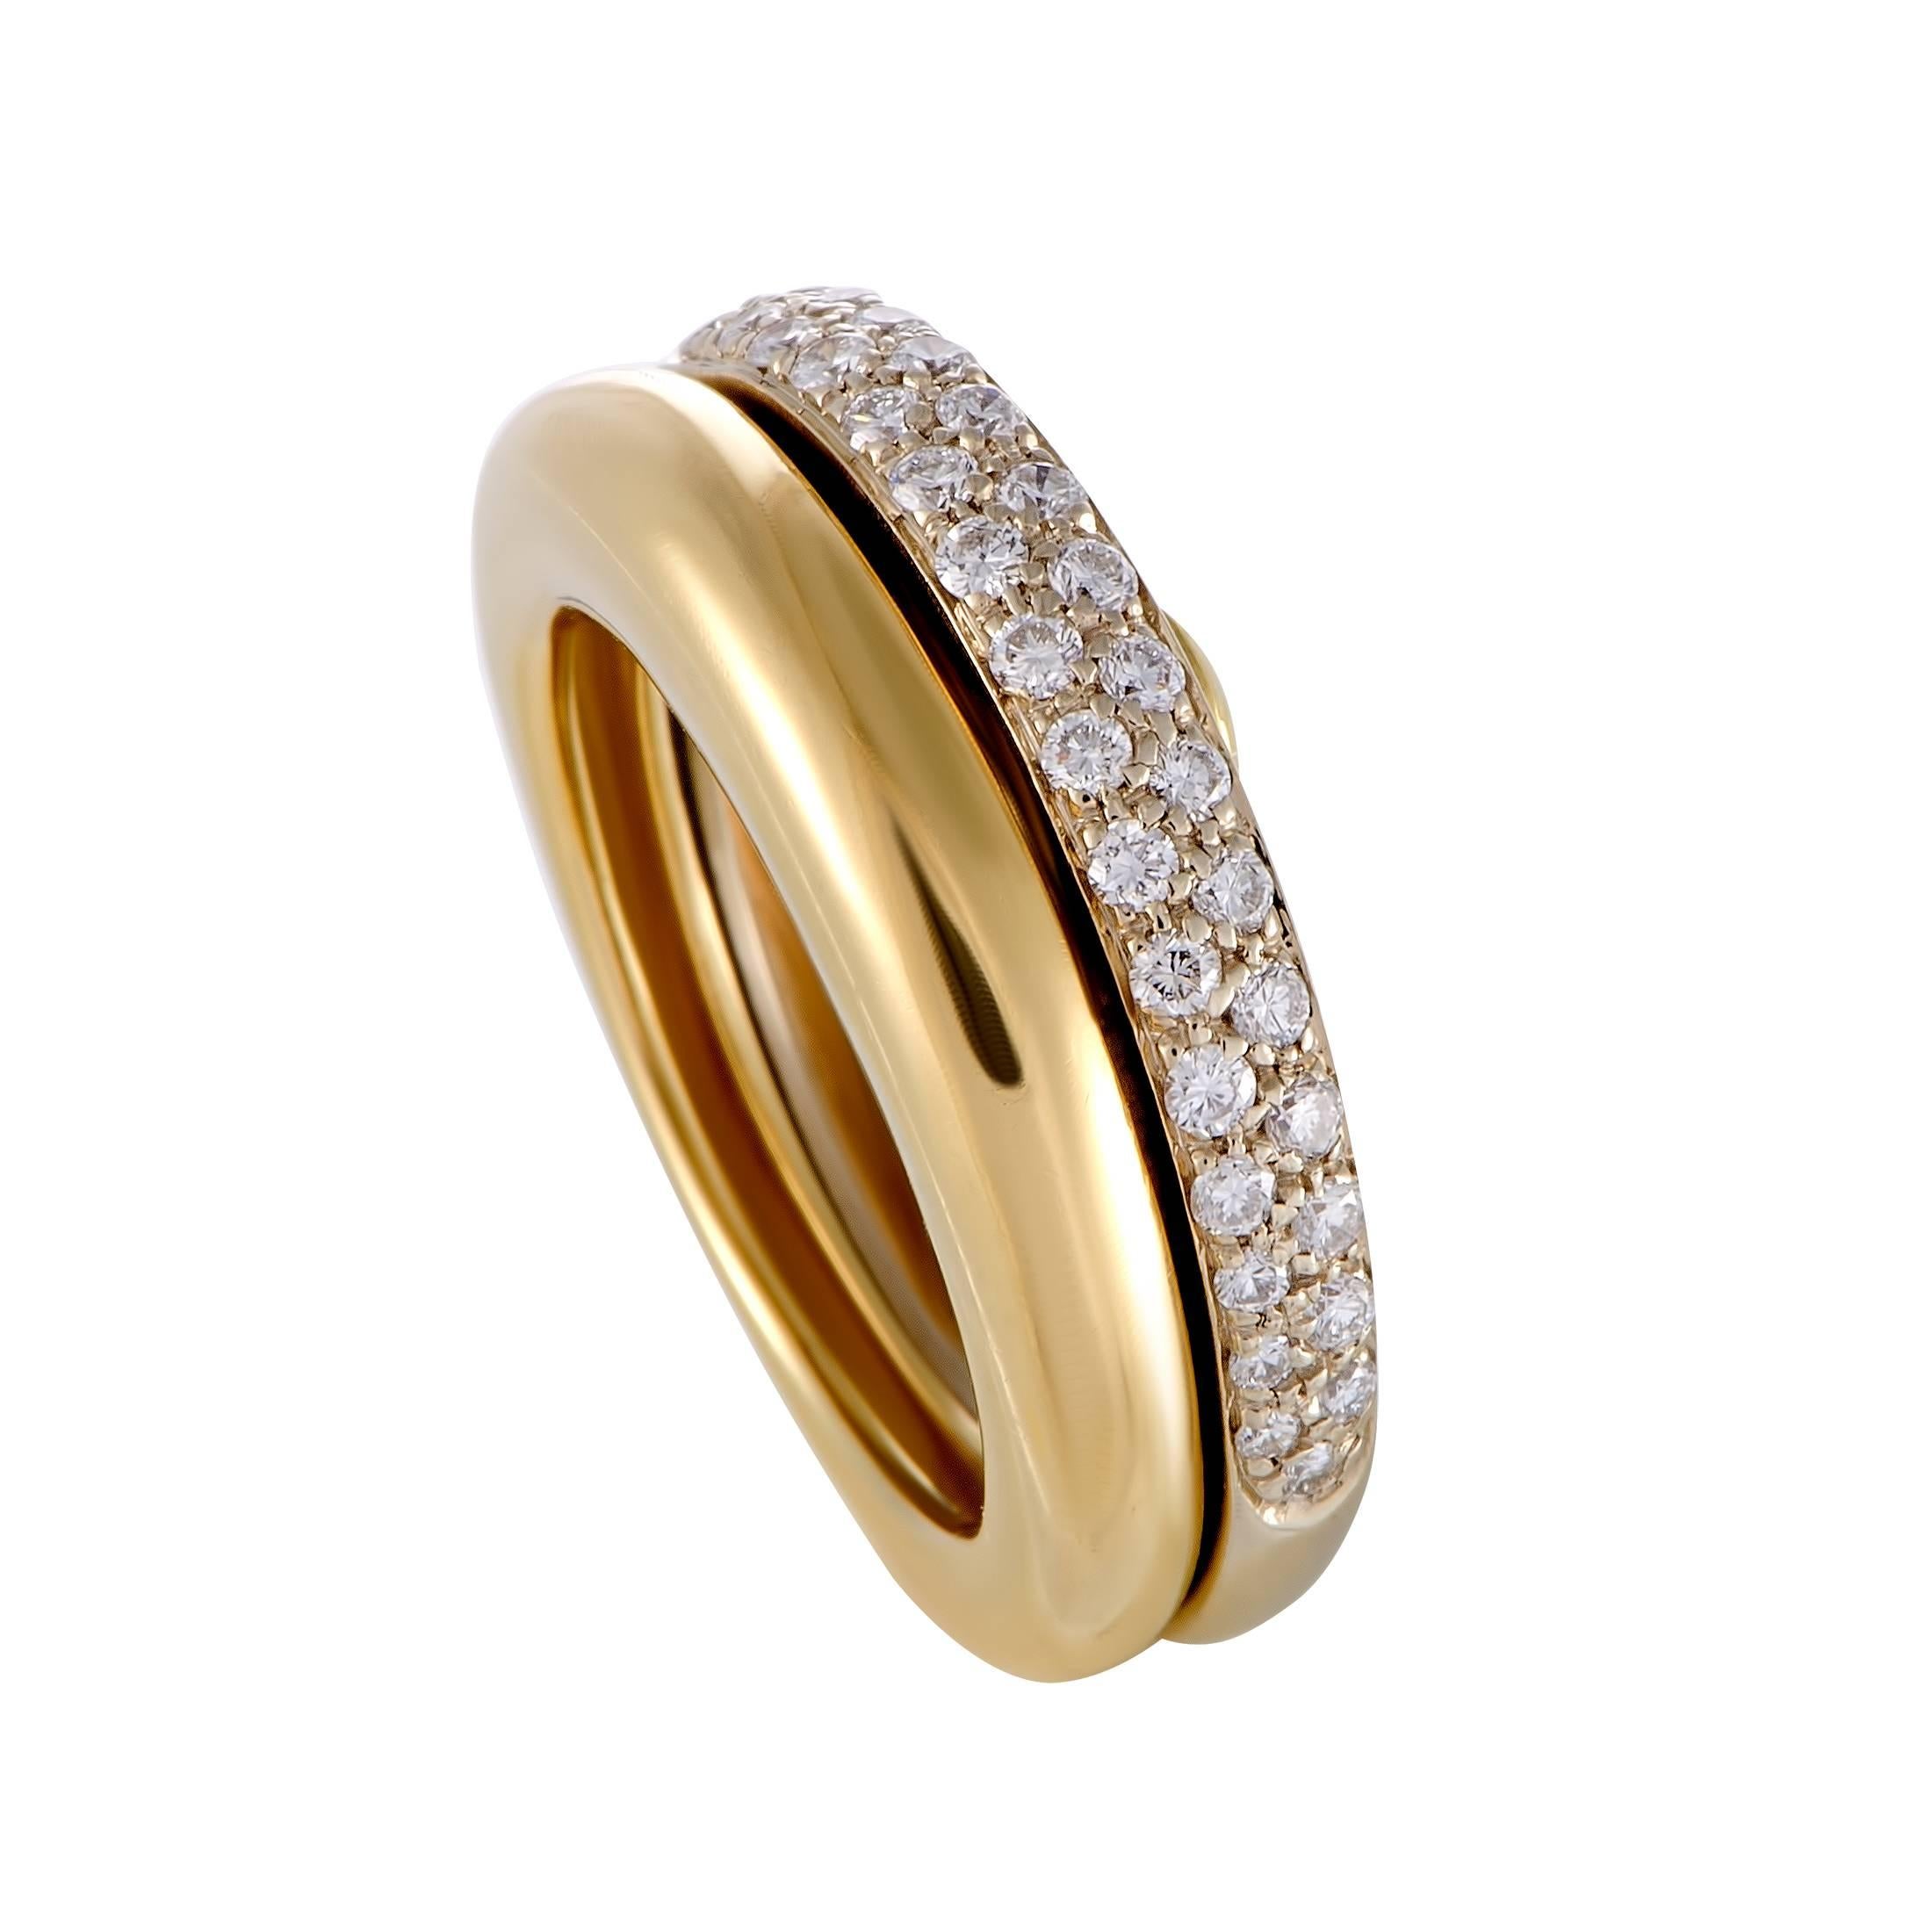 Cartier Diamond Yellow and White Gold Detachable Band Ring